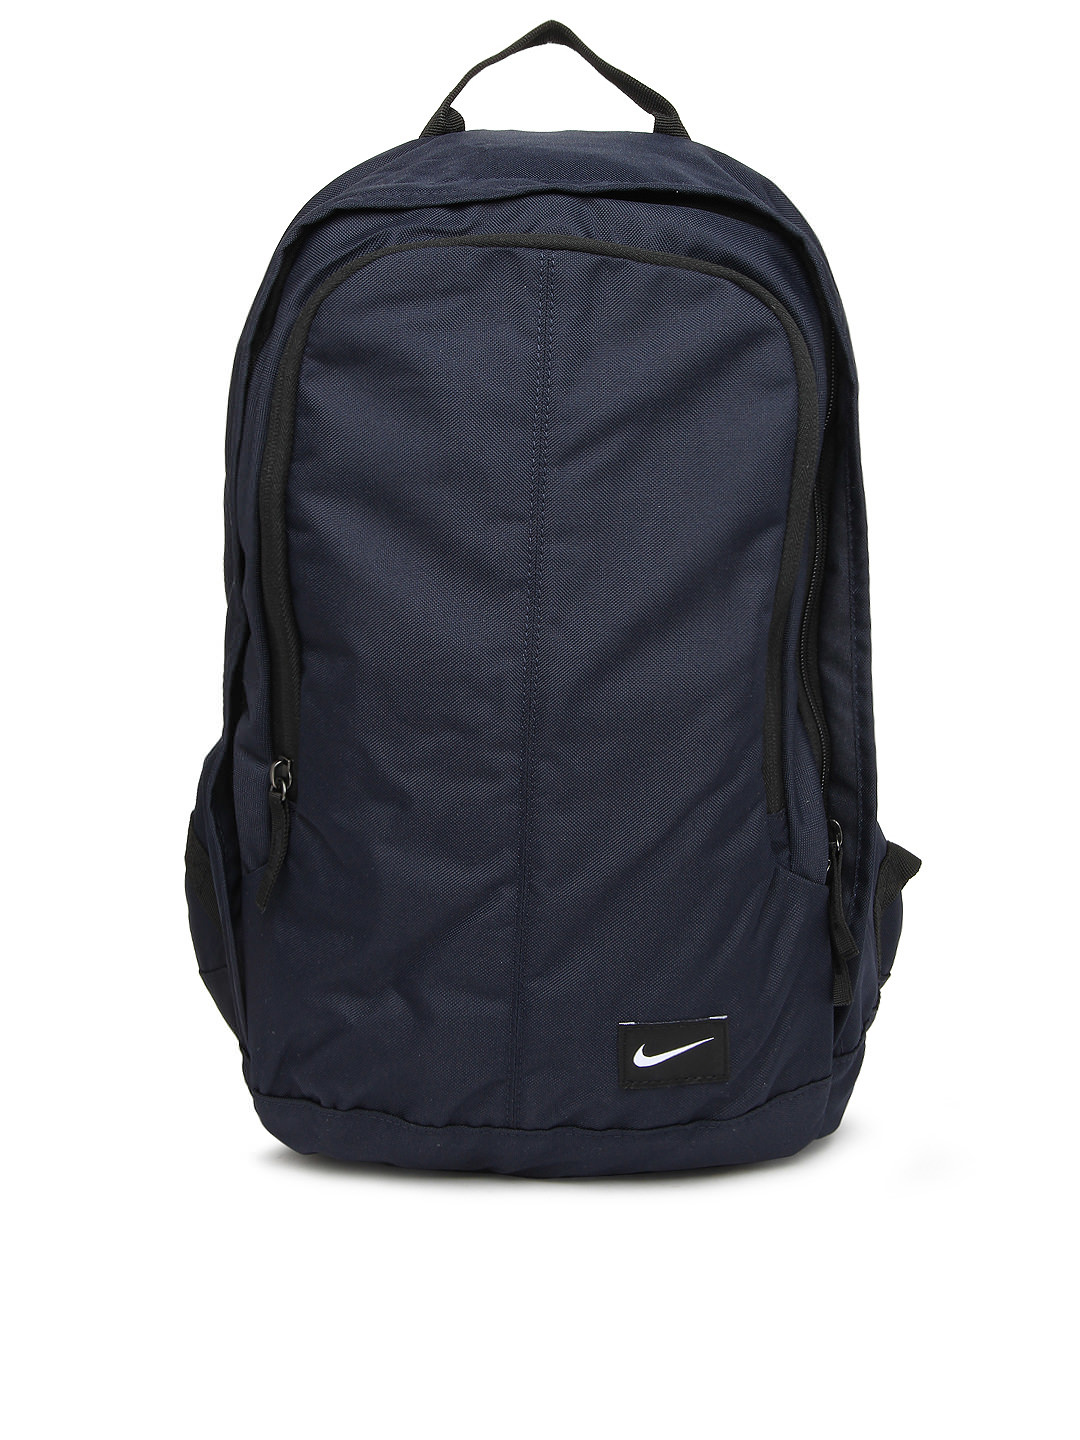 Nike Men Navy Printed Backpack at Best Prices - Shopclues Online Shopping Store